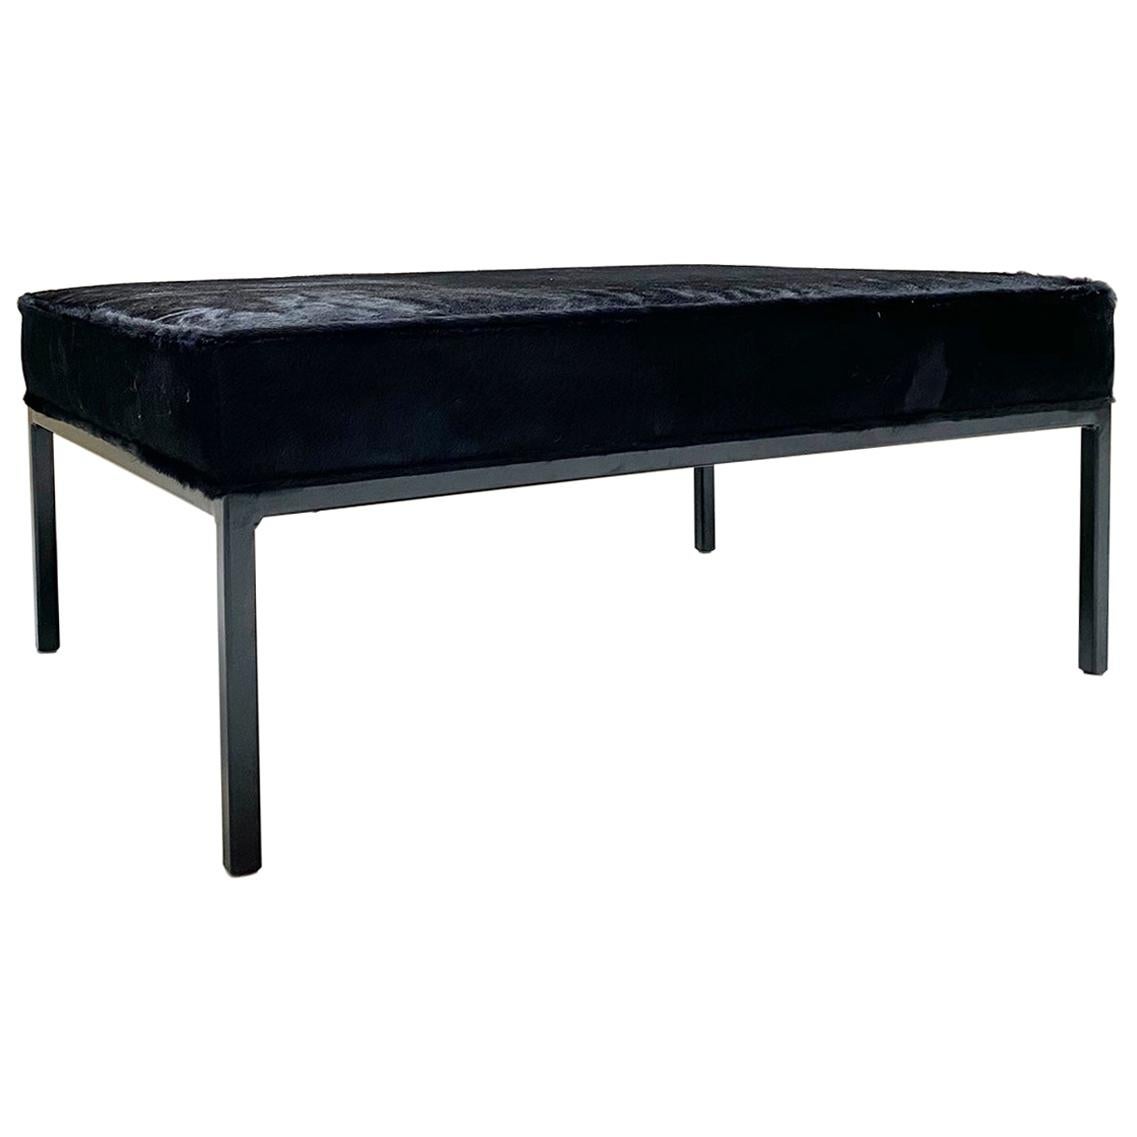 The Forsyth Ottoman in Brazilian Cowhide